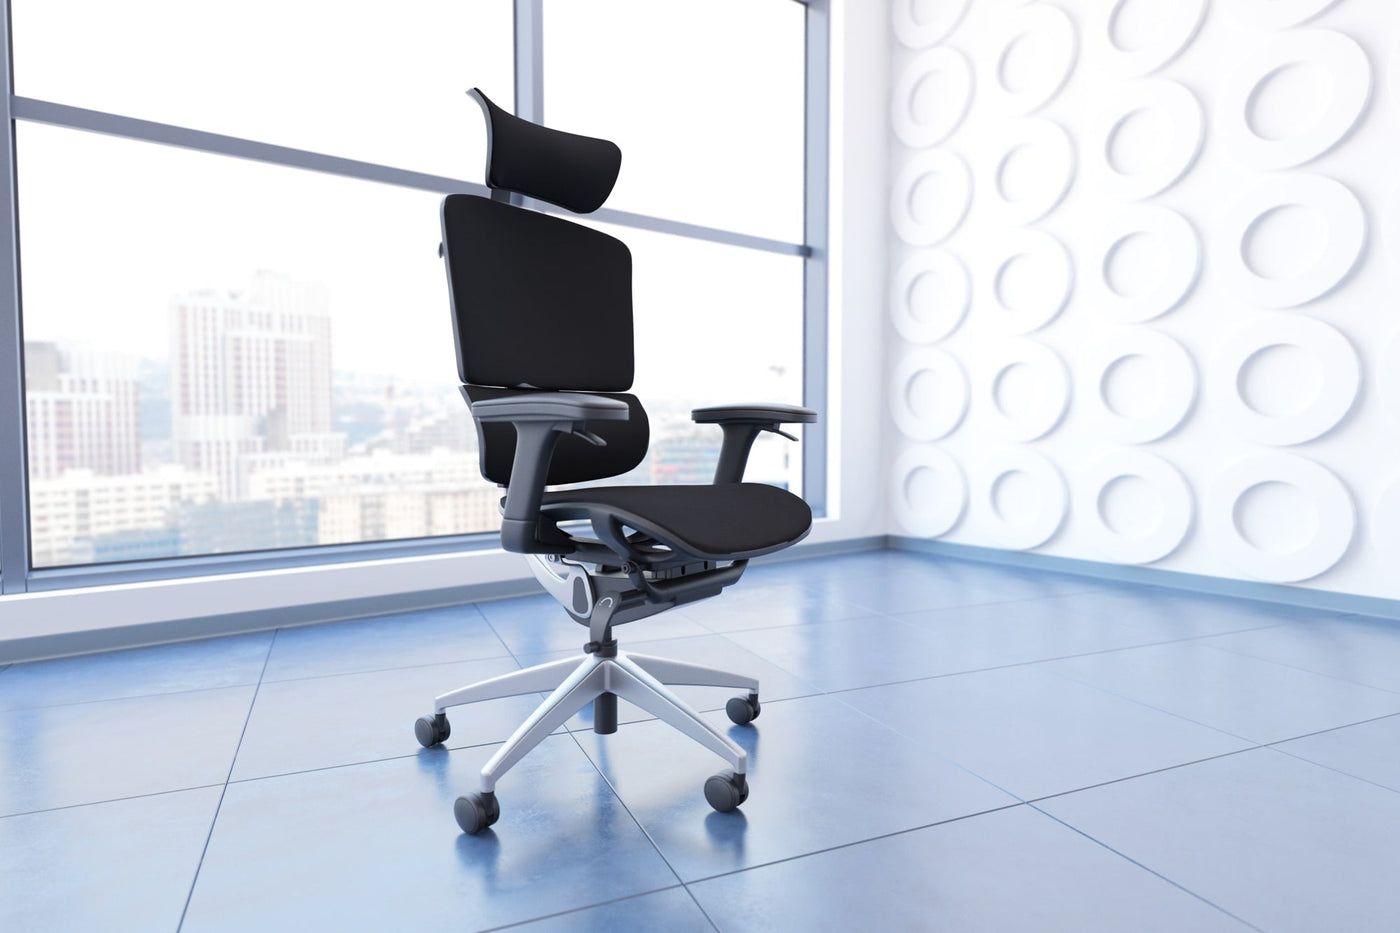 ErgoClick Plus Home Office Chair | Posture Chair | Home Office Furniture | Combat poor posture | Chair that helps with posture | Ergonomic Office Furniture